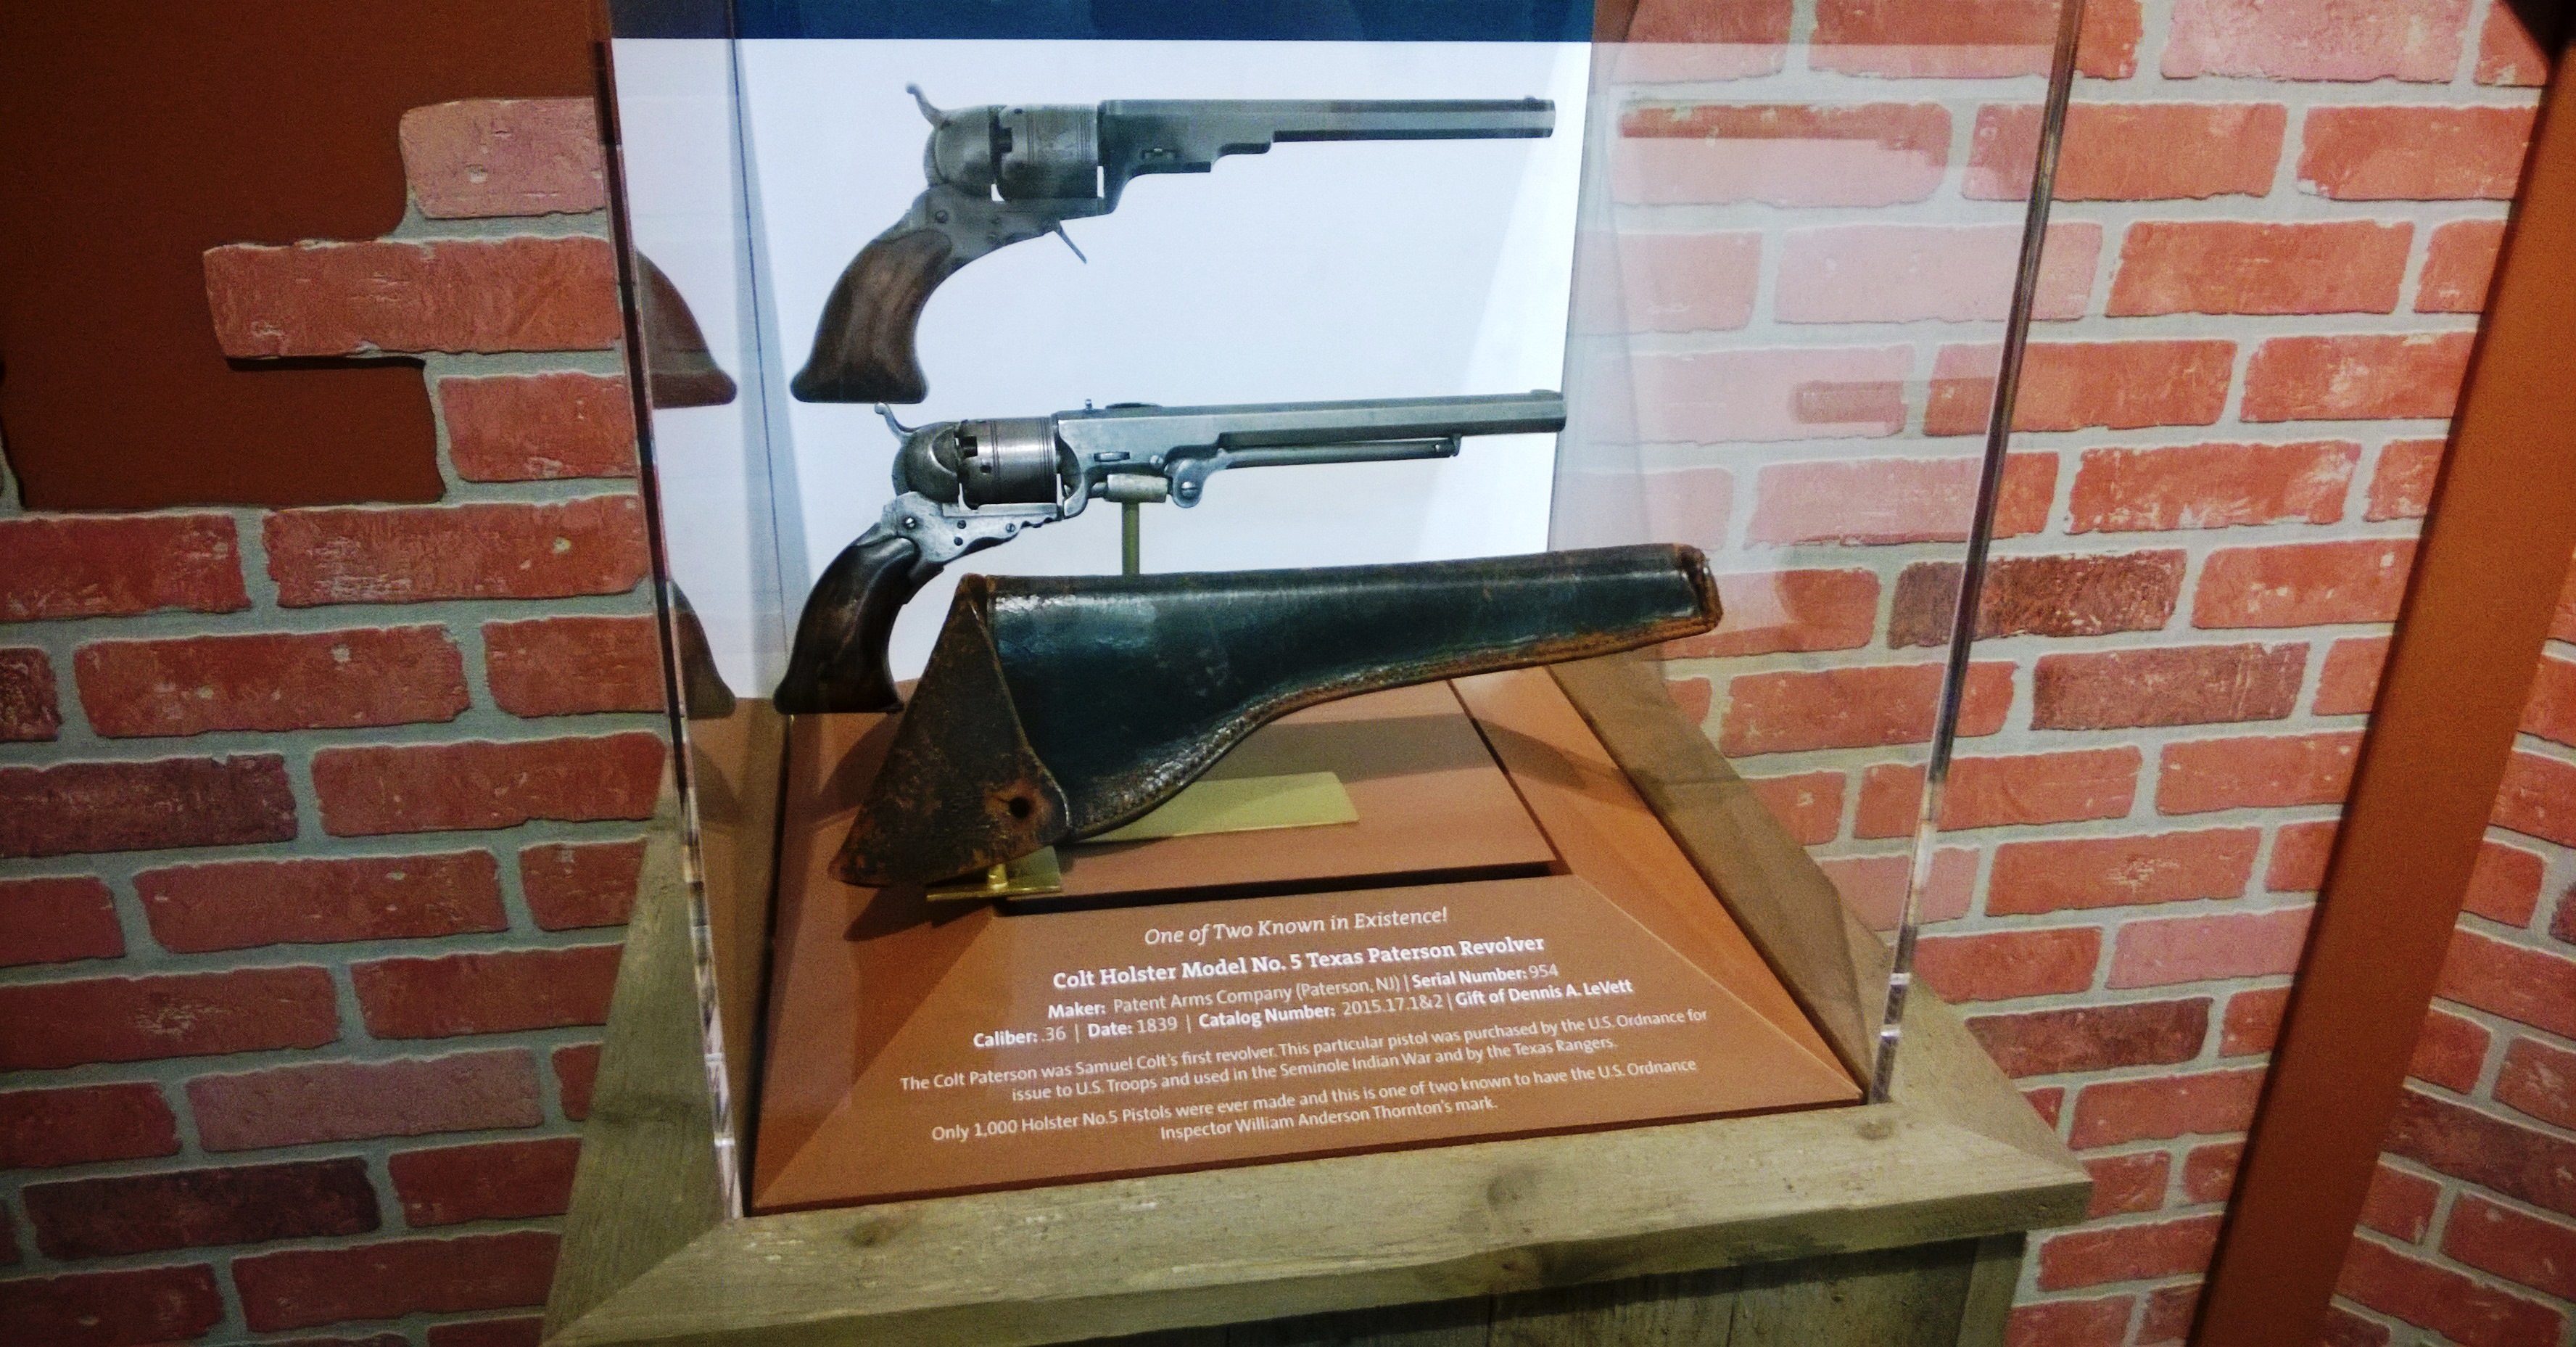 The rare Texas Model Colt Paterson now on view at Buffalo Bill Center of the West